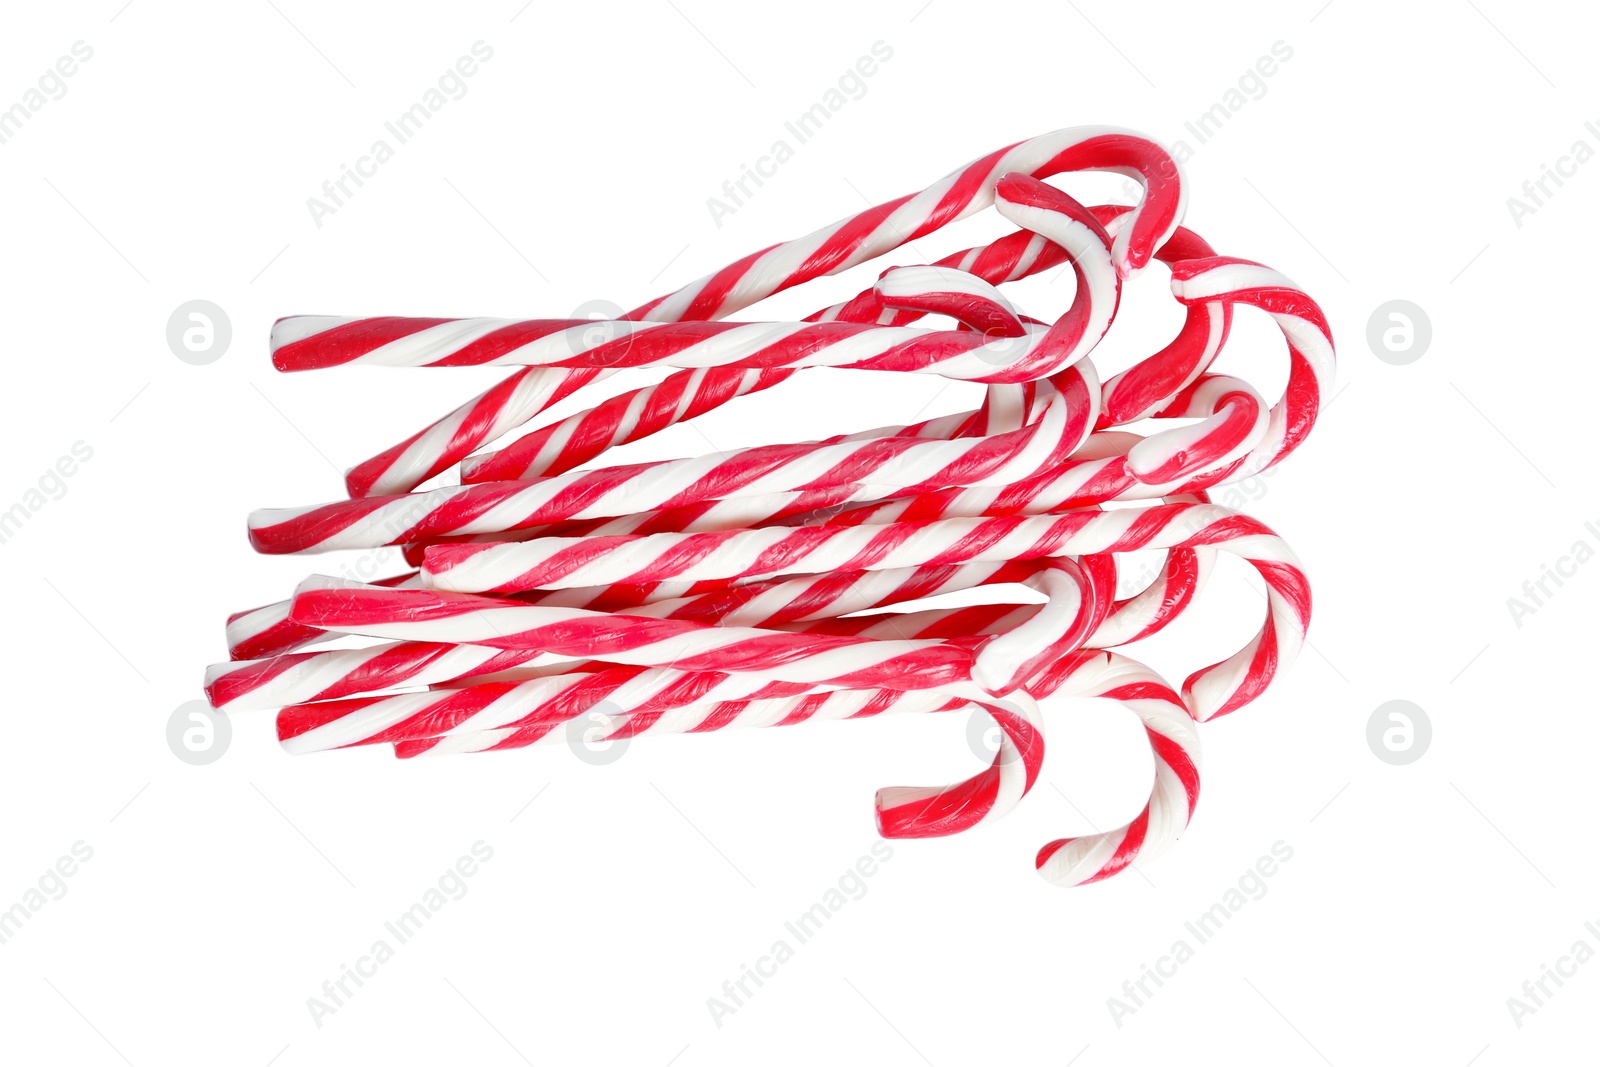 Image of Sweet candy canes on white background, top view. Christmas treat 